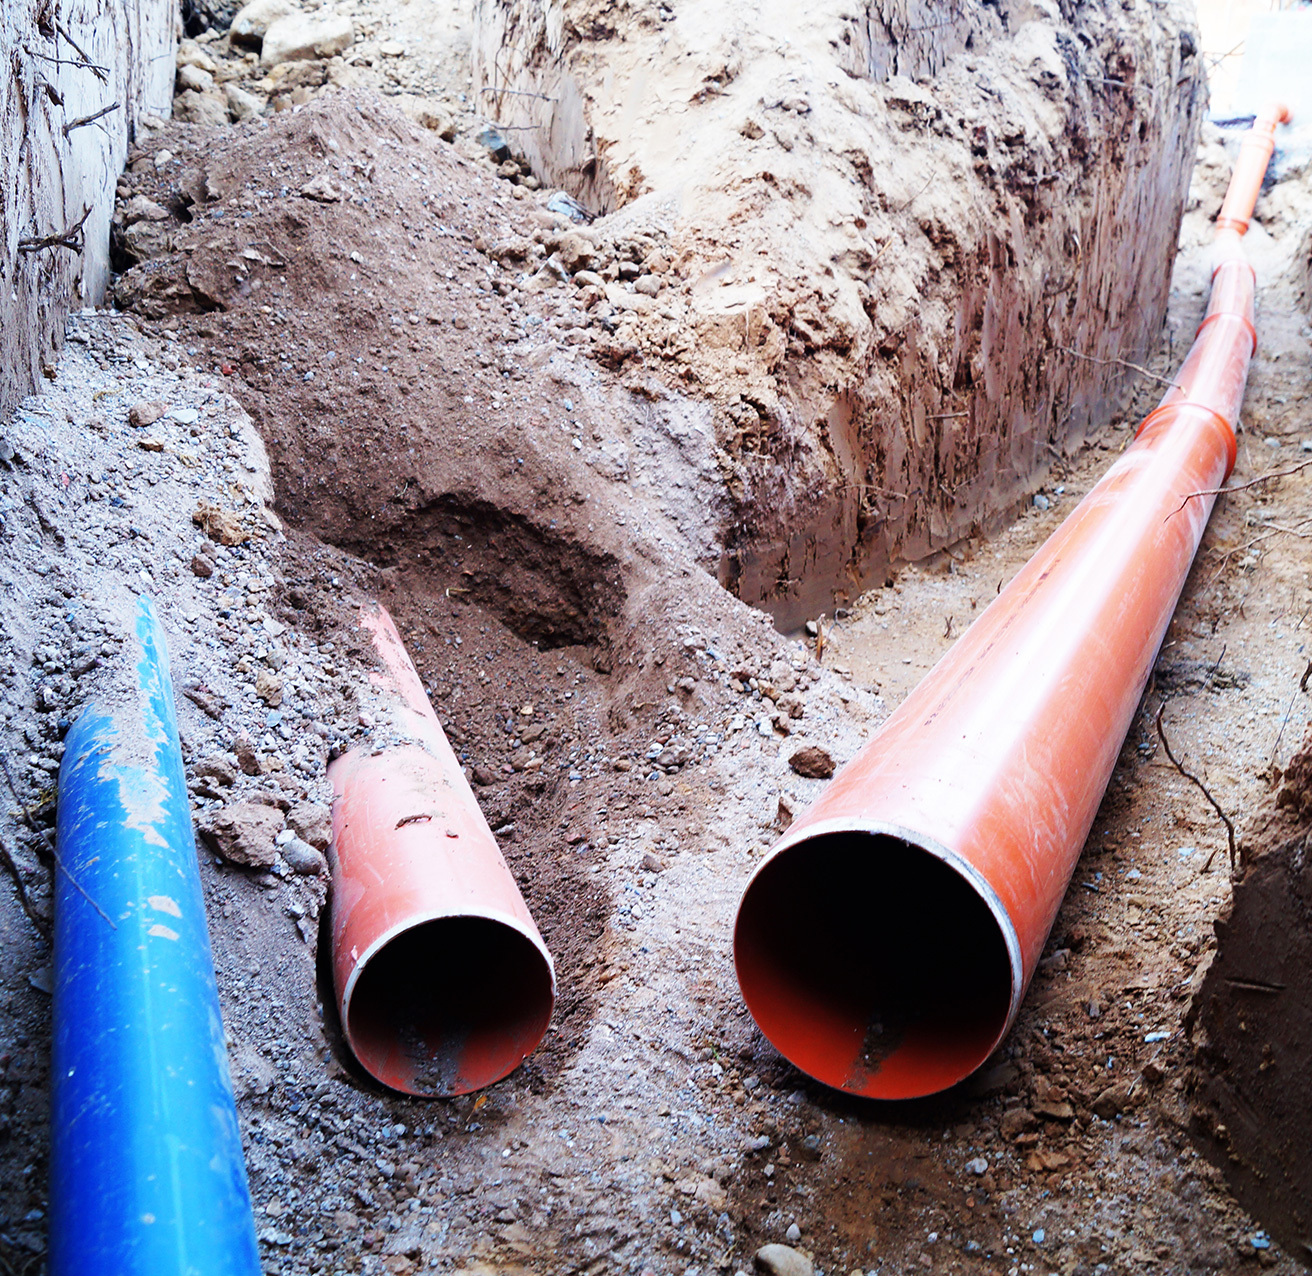 Wastewater pipelines under construction